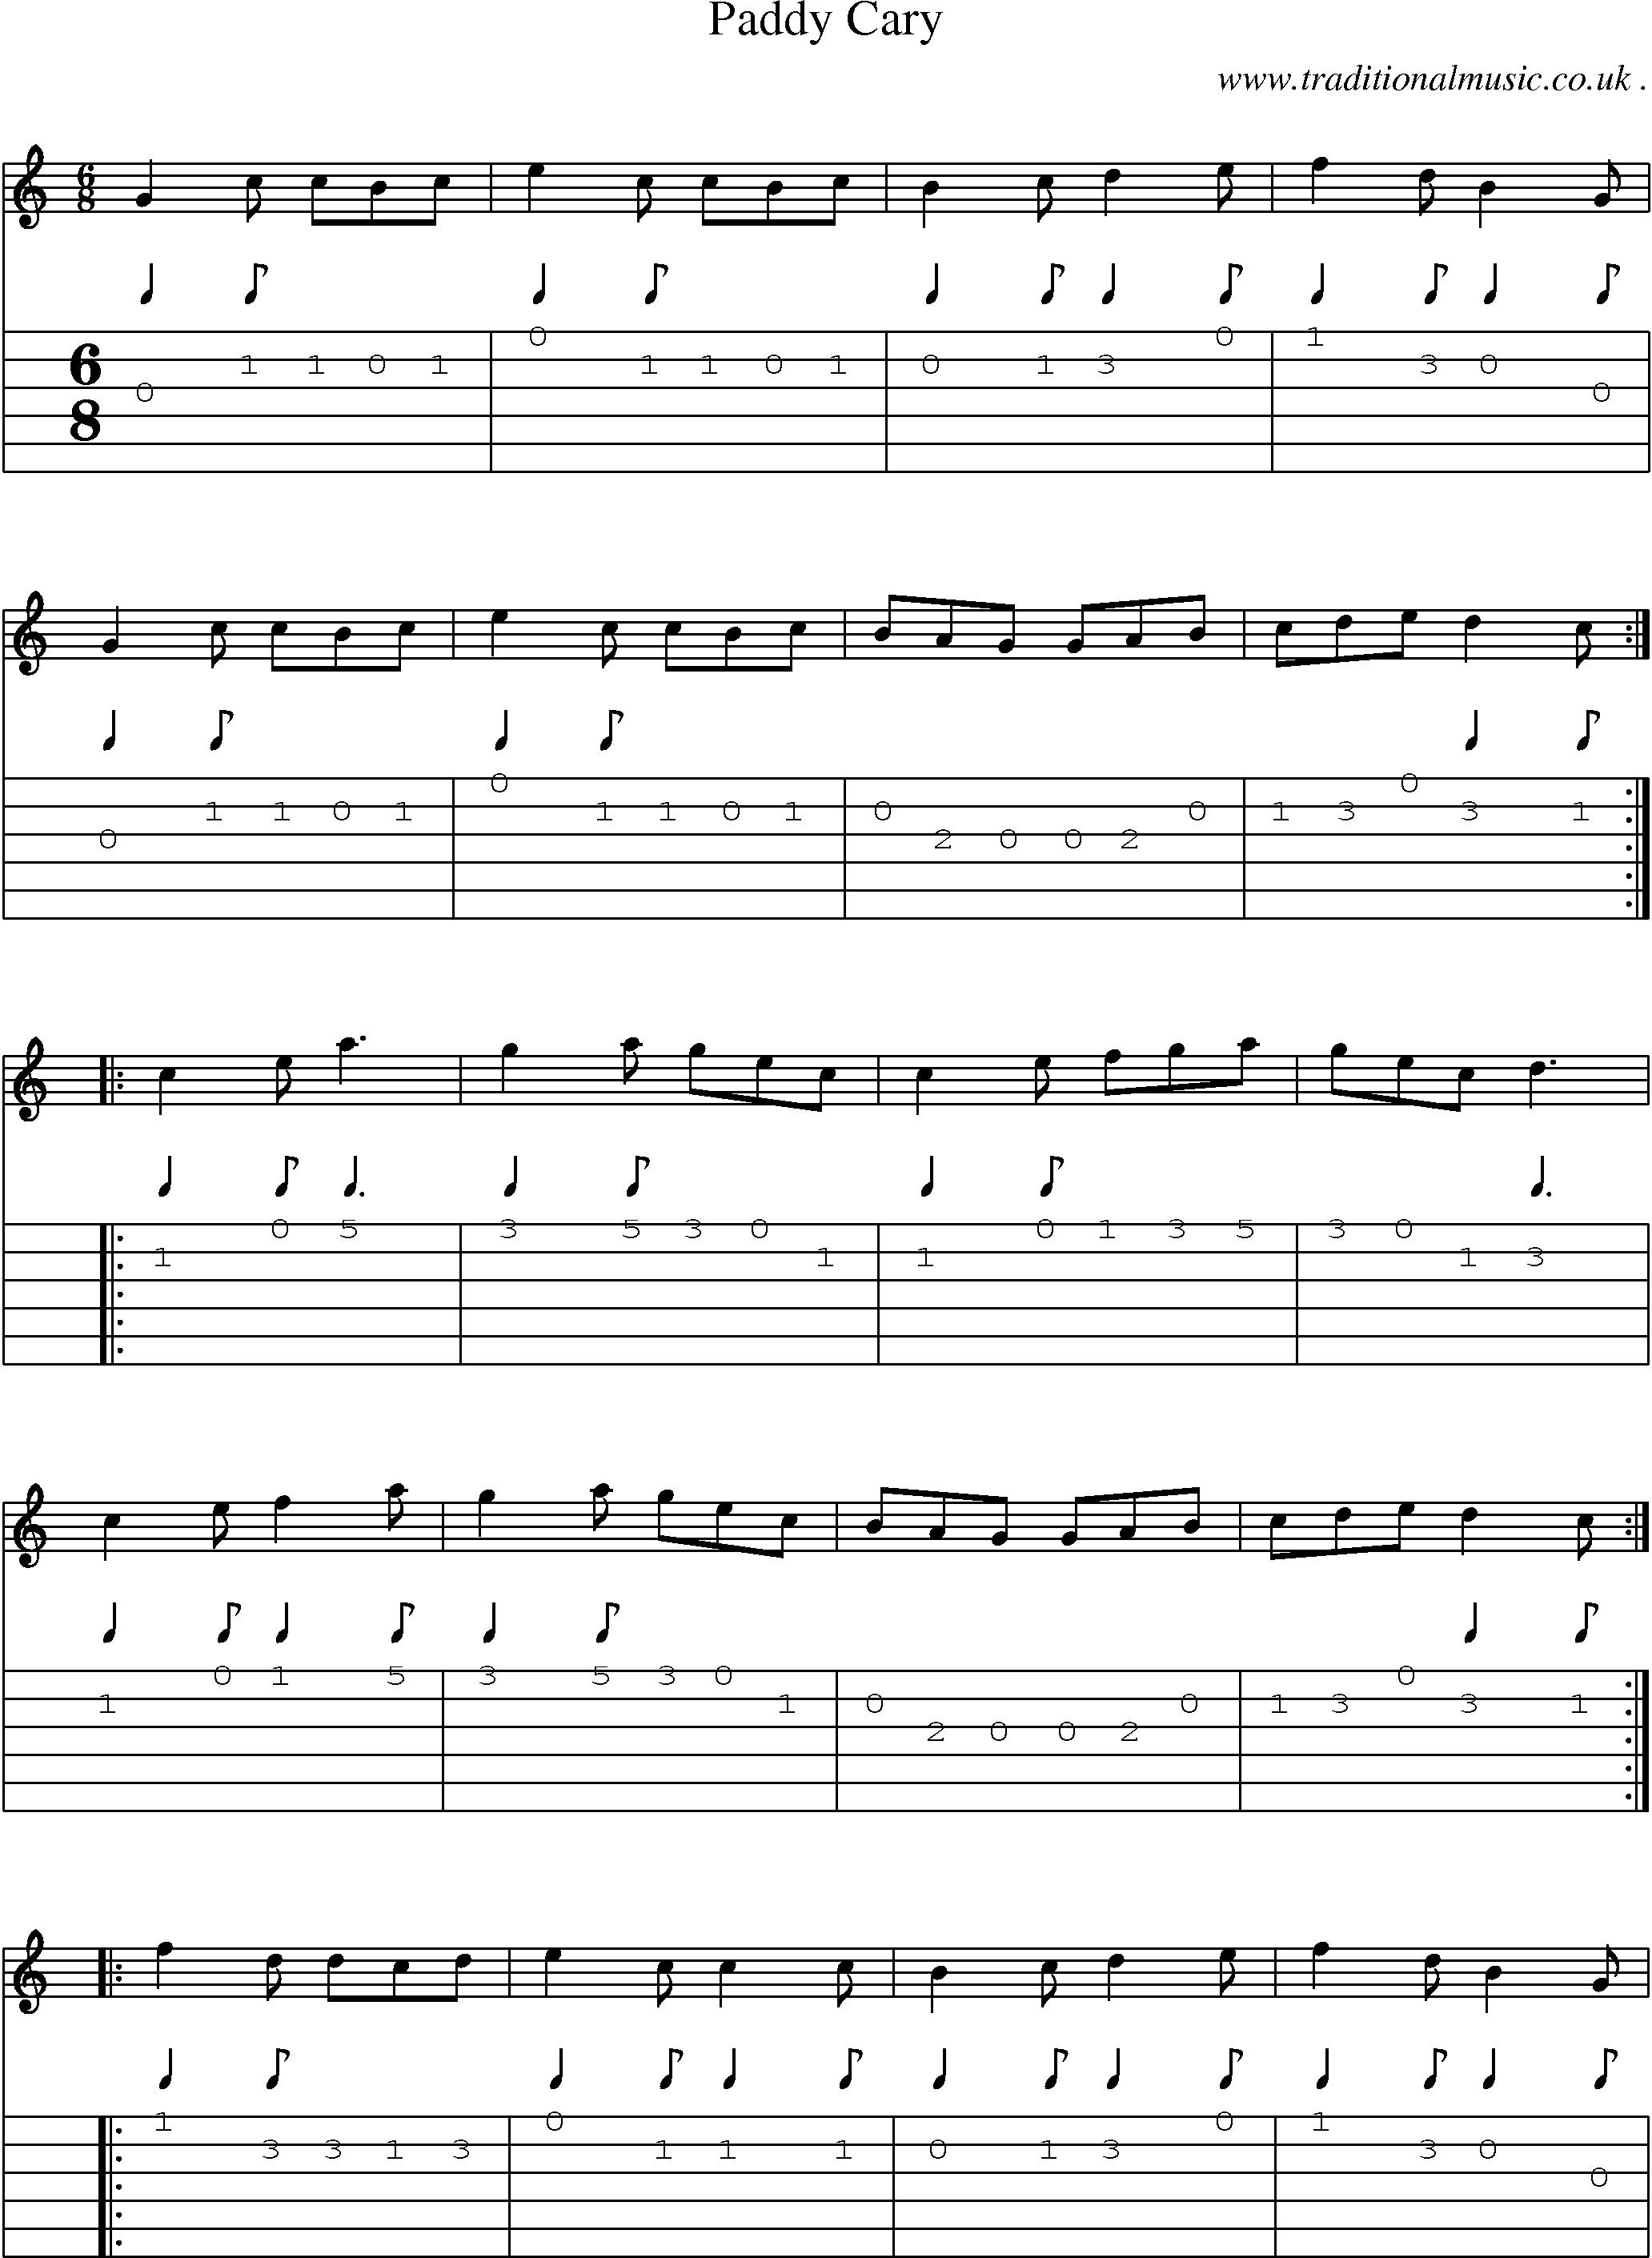 Sheet-Music and Guitar Tabs for Paddy Cary